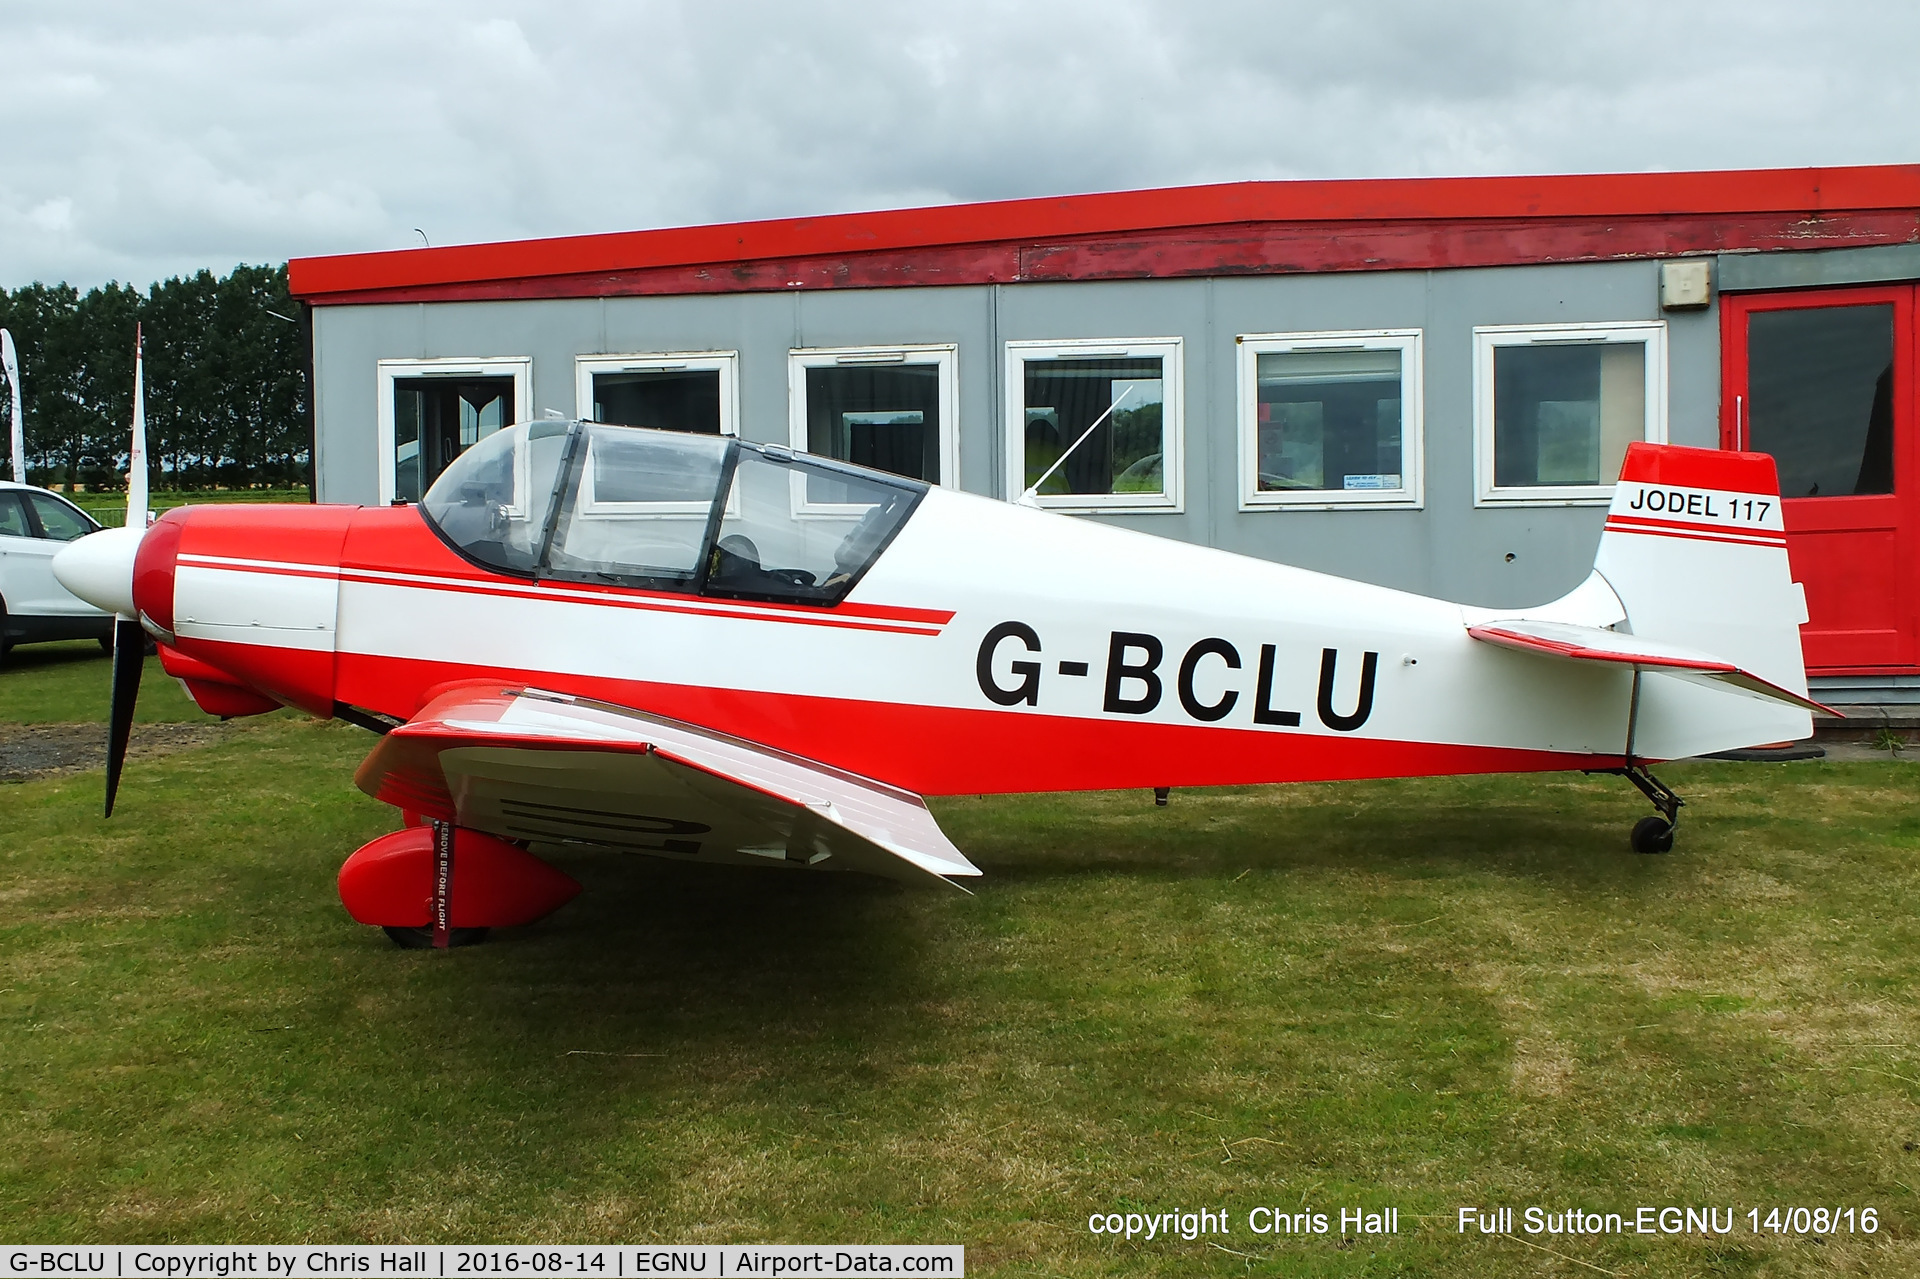 G-BCLU, 1957 SAN Jodel D-117 C/N 506, at the LAA Vale of York Strut fly-in, Full Sutton